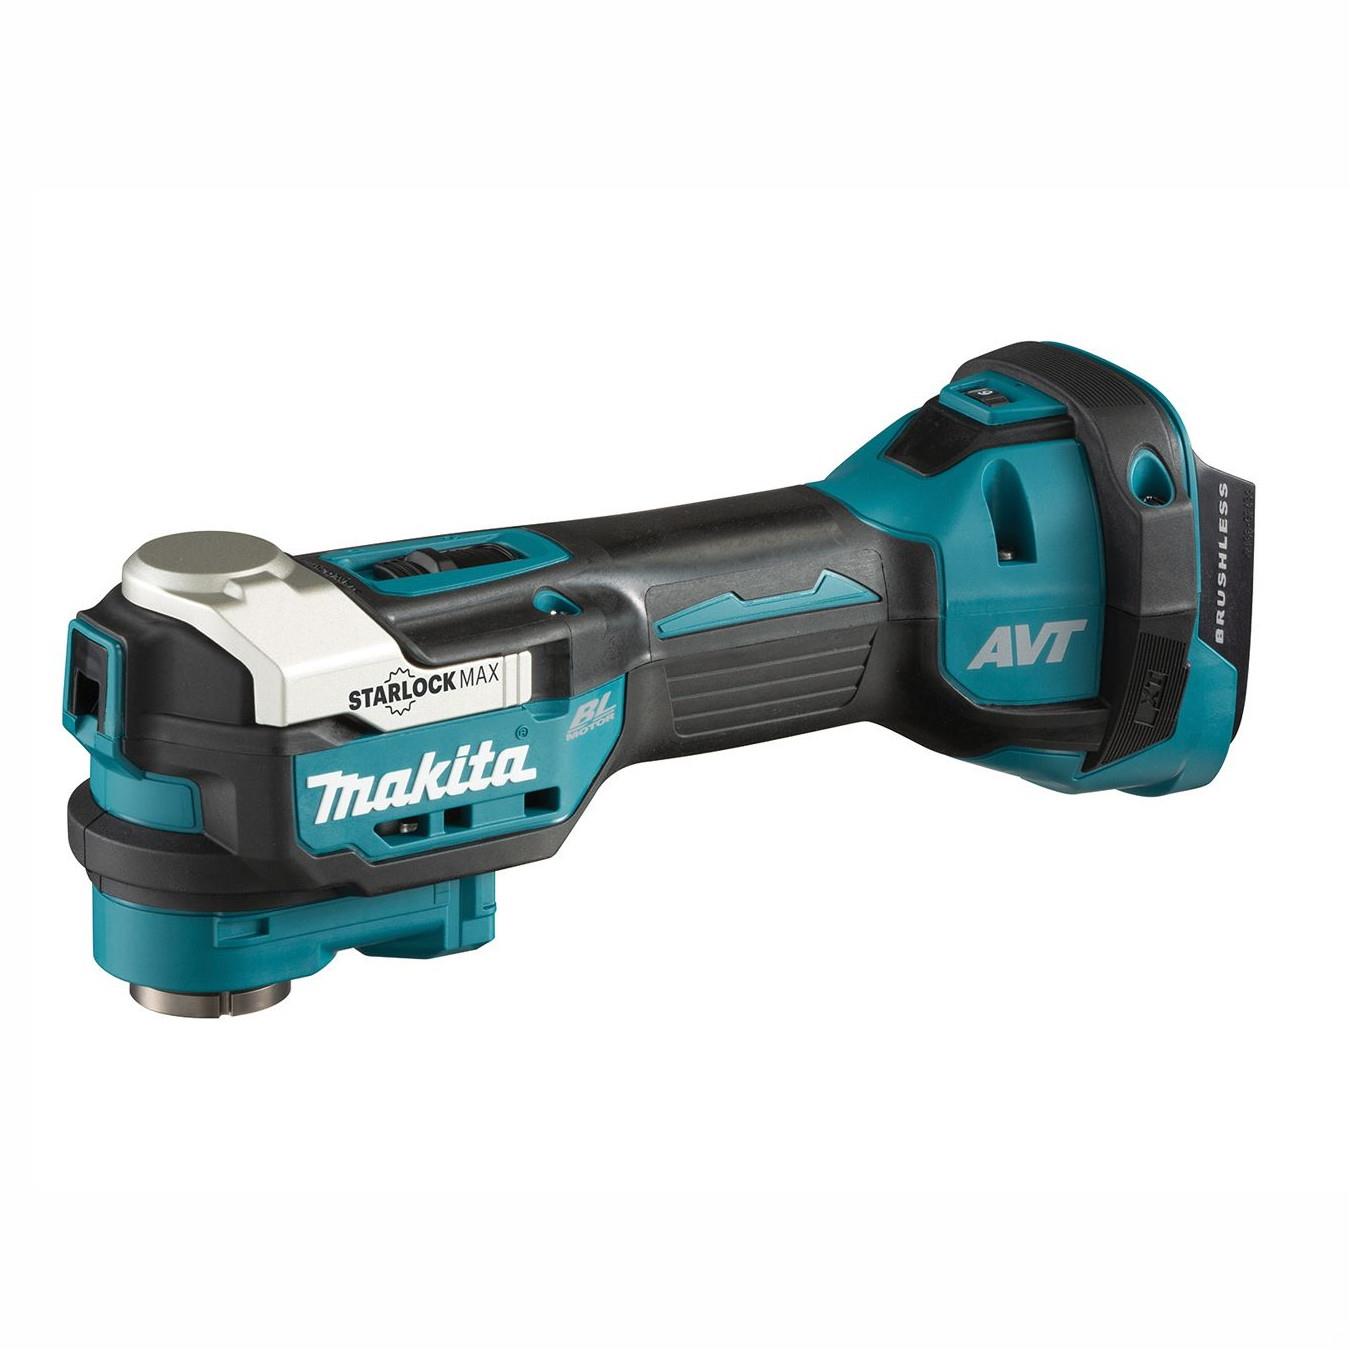 Makita DTM52Z Quick Tool Release Multi-Tool (Oscillating Interface System); 18V Li-ion; Bare Unit (Body Only); Compatible With Starlock; Starlock Plus; And Starlock Max Blades